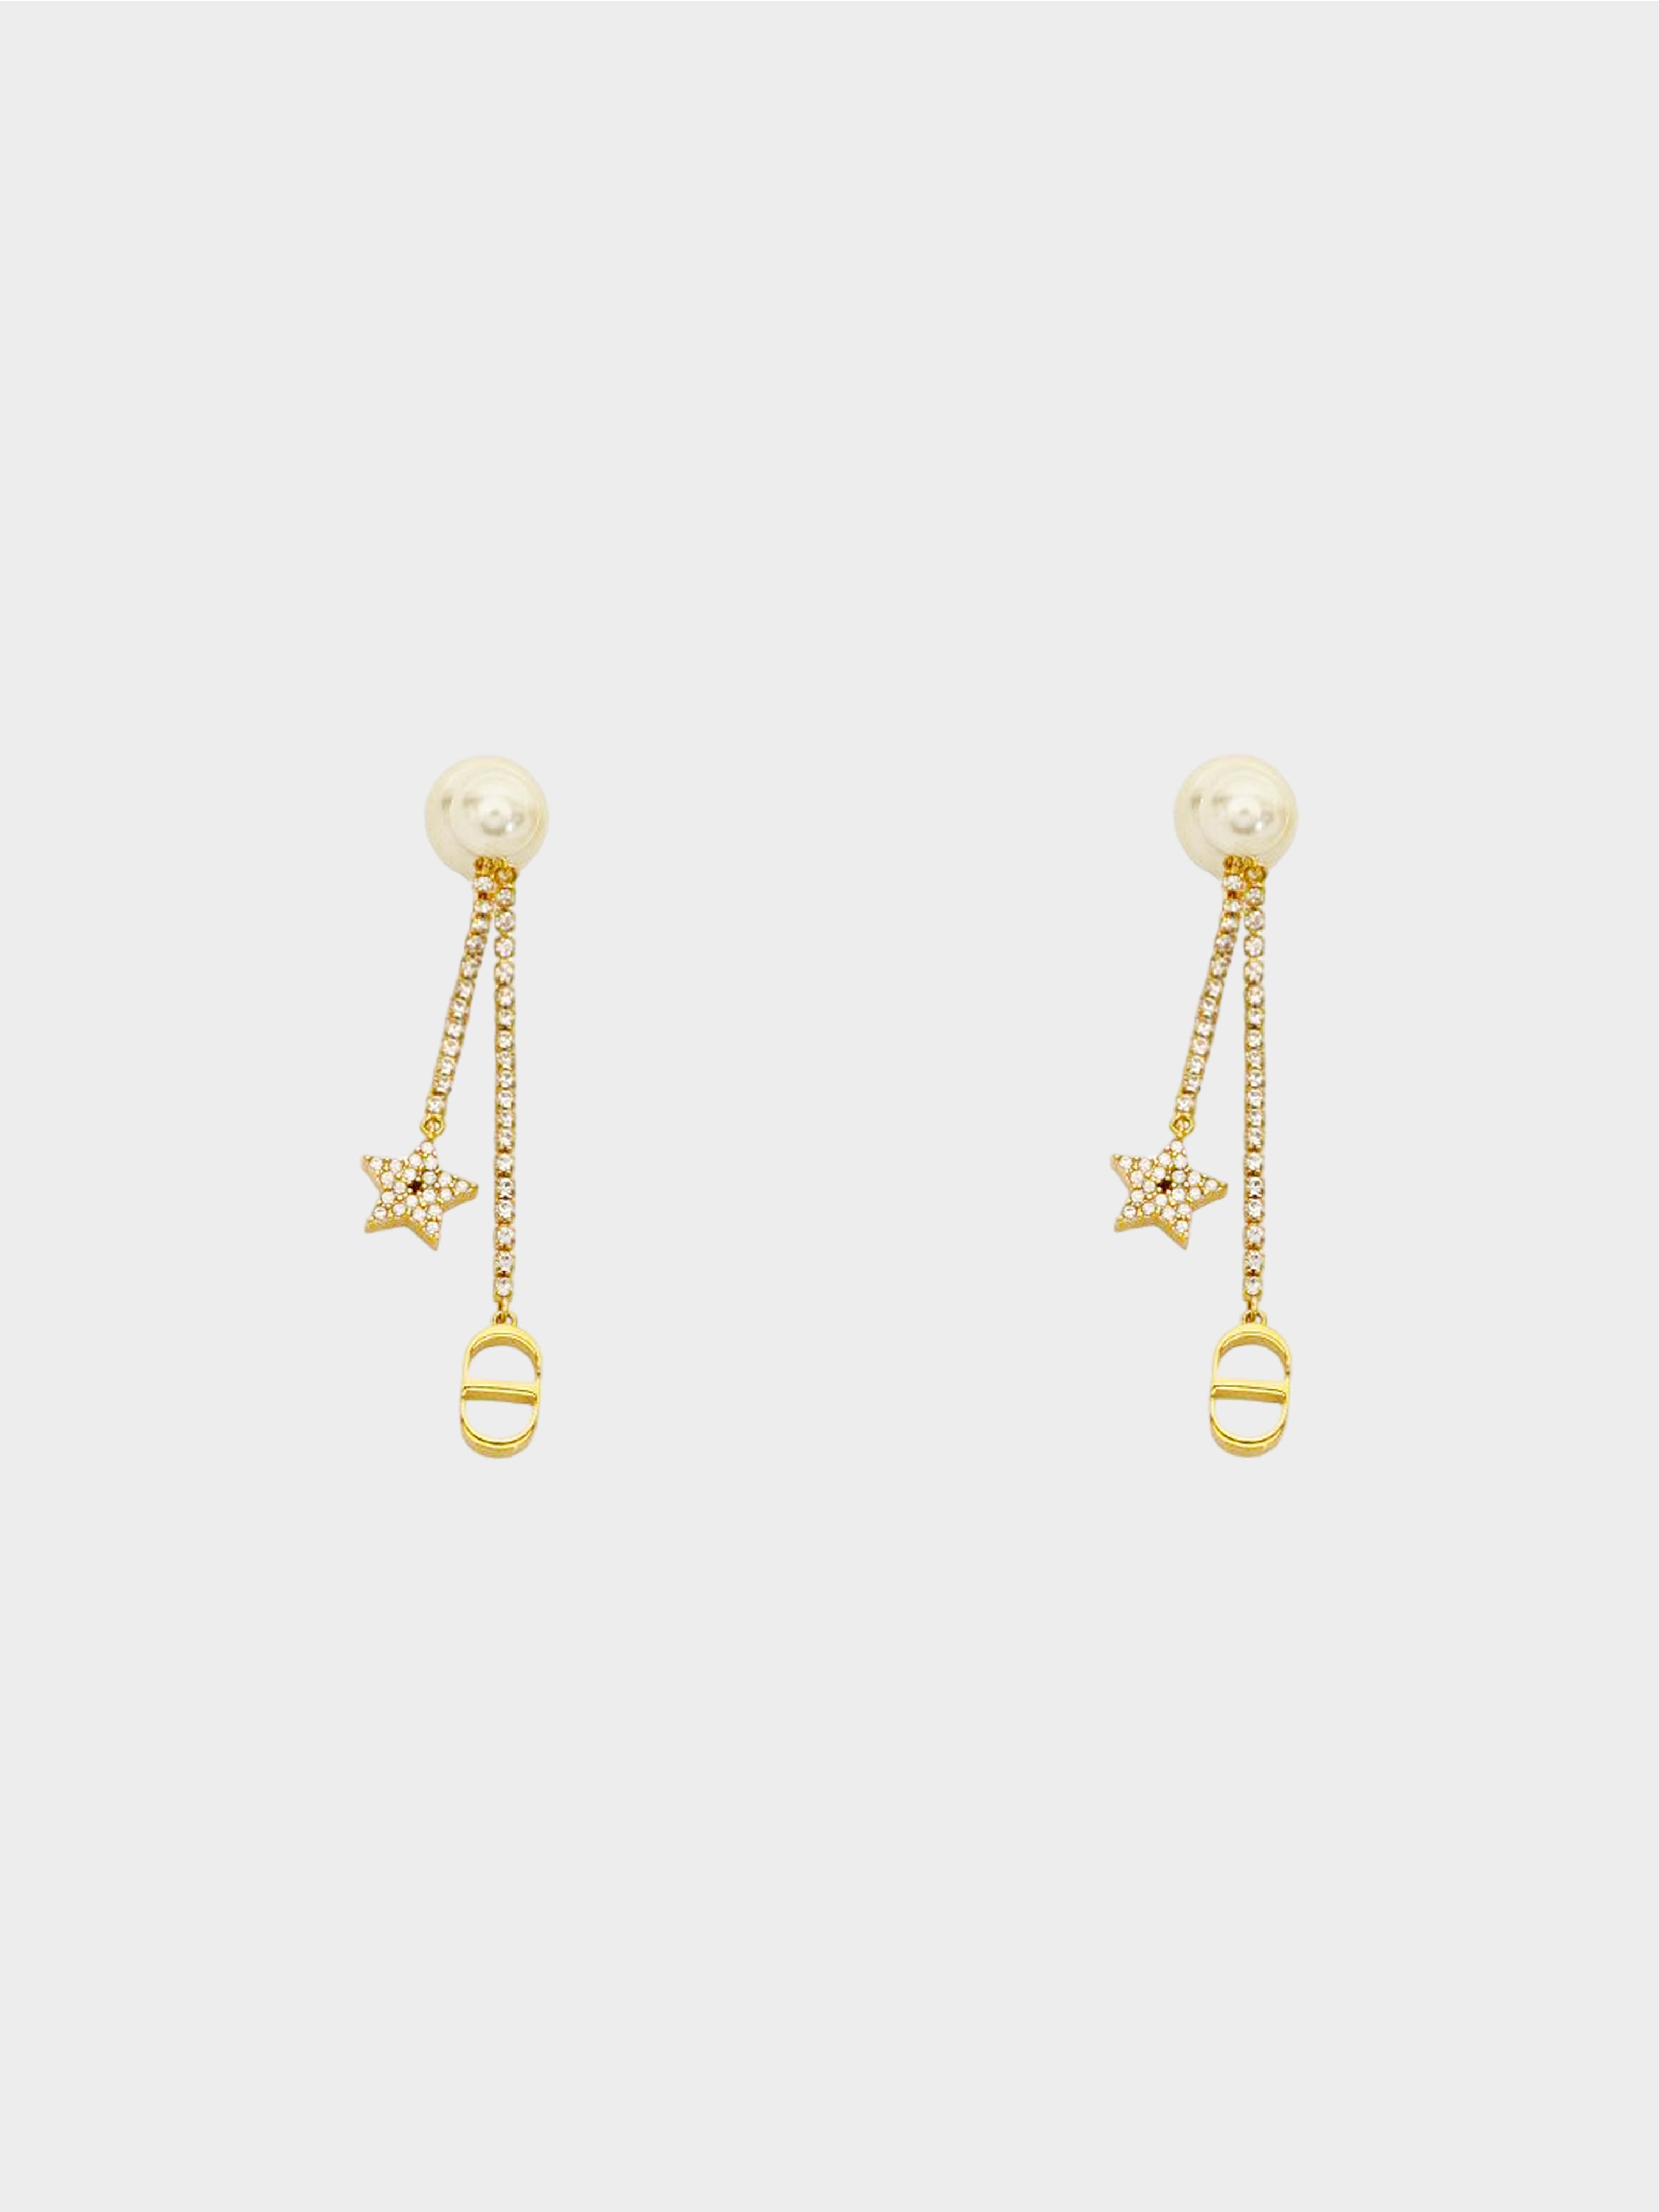 Christian Dior SS 2020 Gold Tribales Hanging Earrings